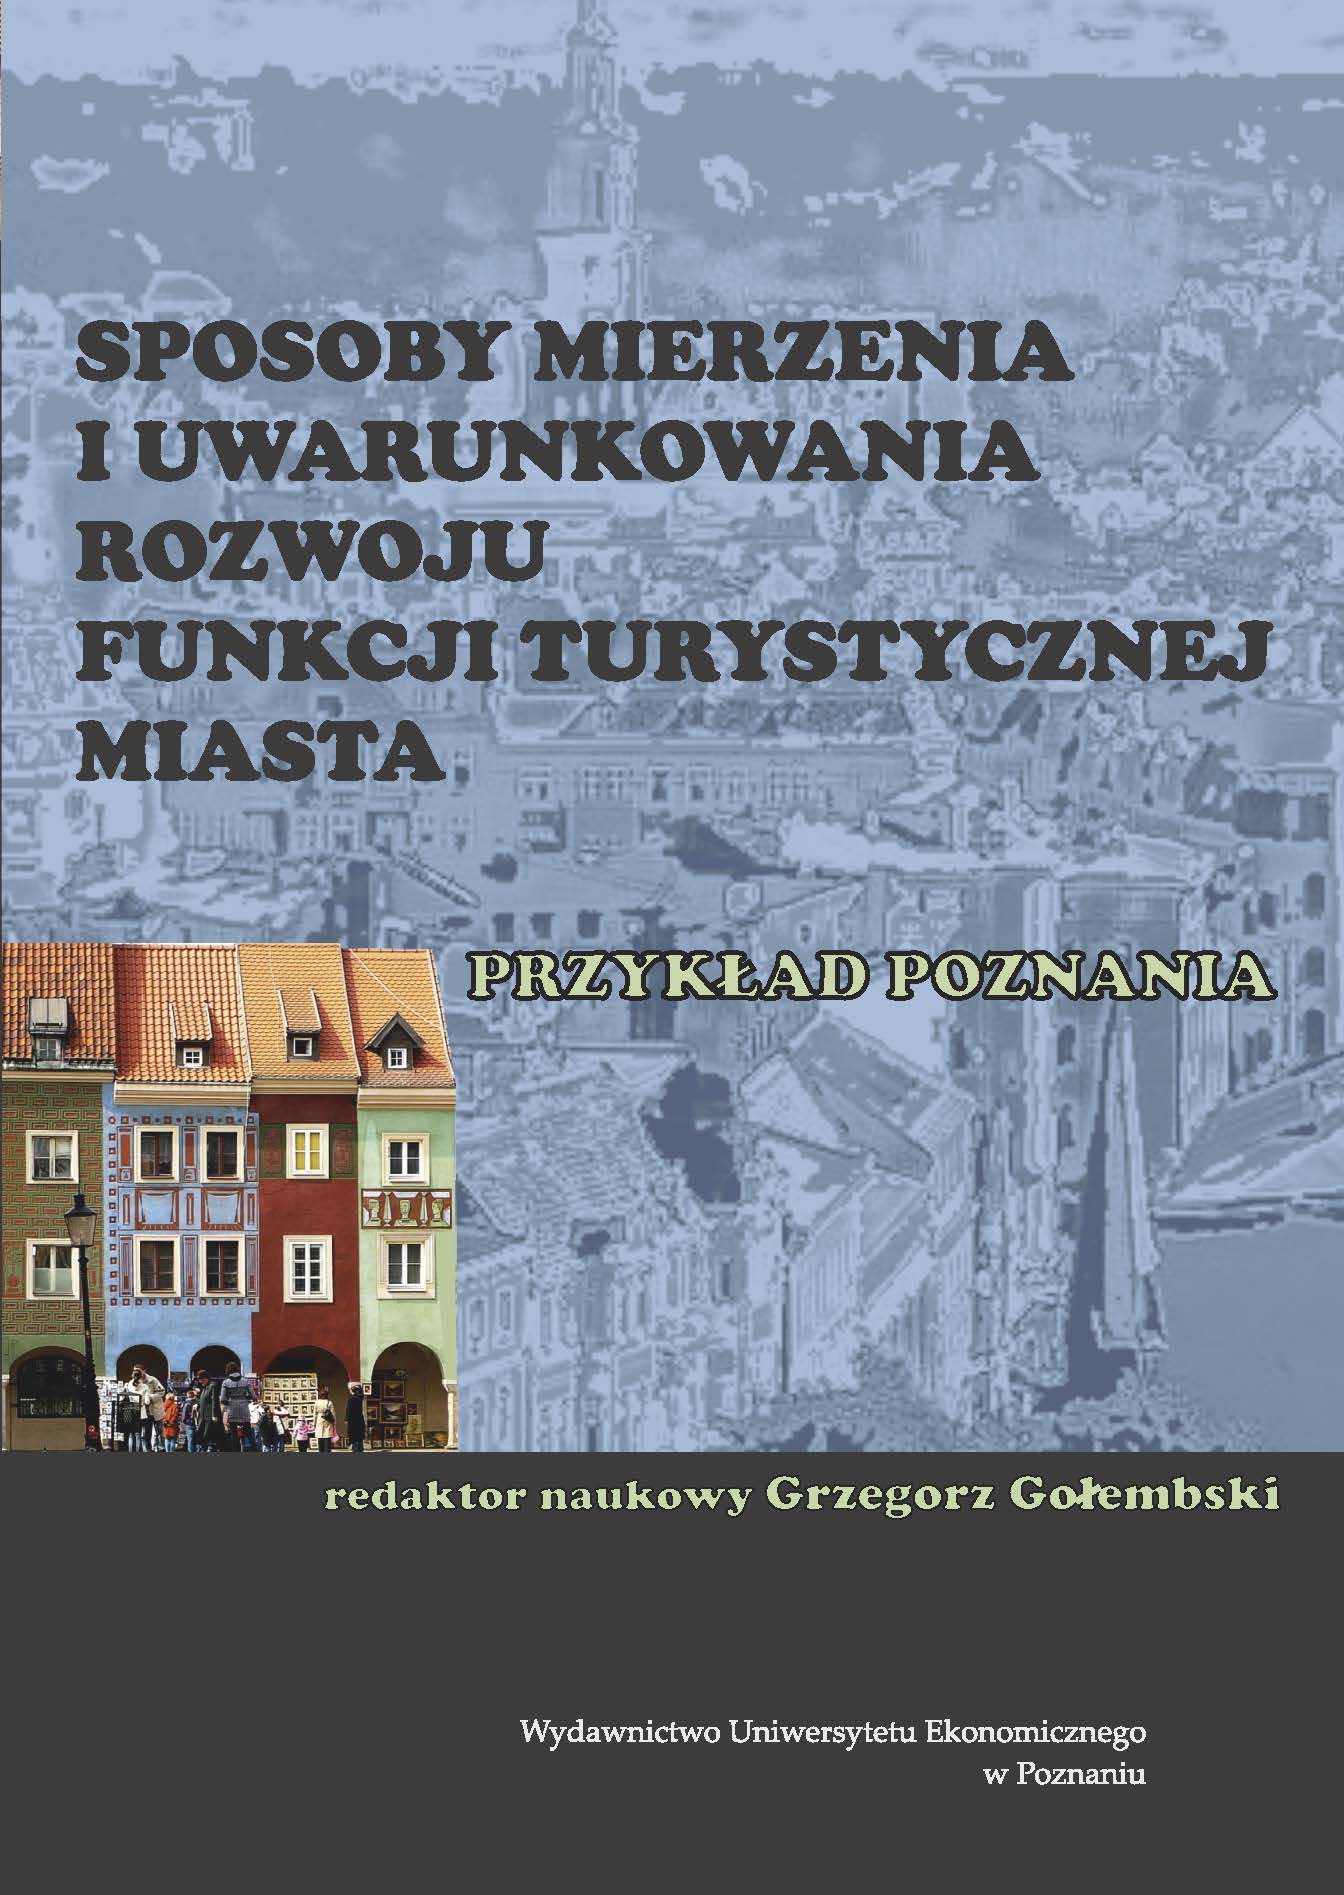 A survey of Poznań residents on tourism development in the city Cover Image